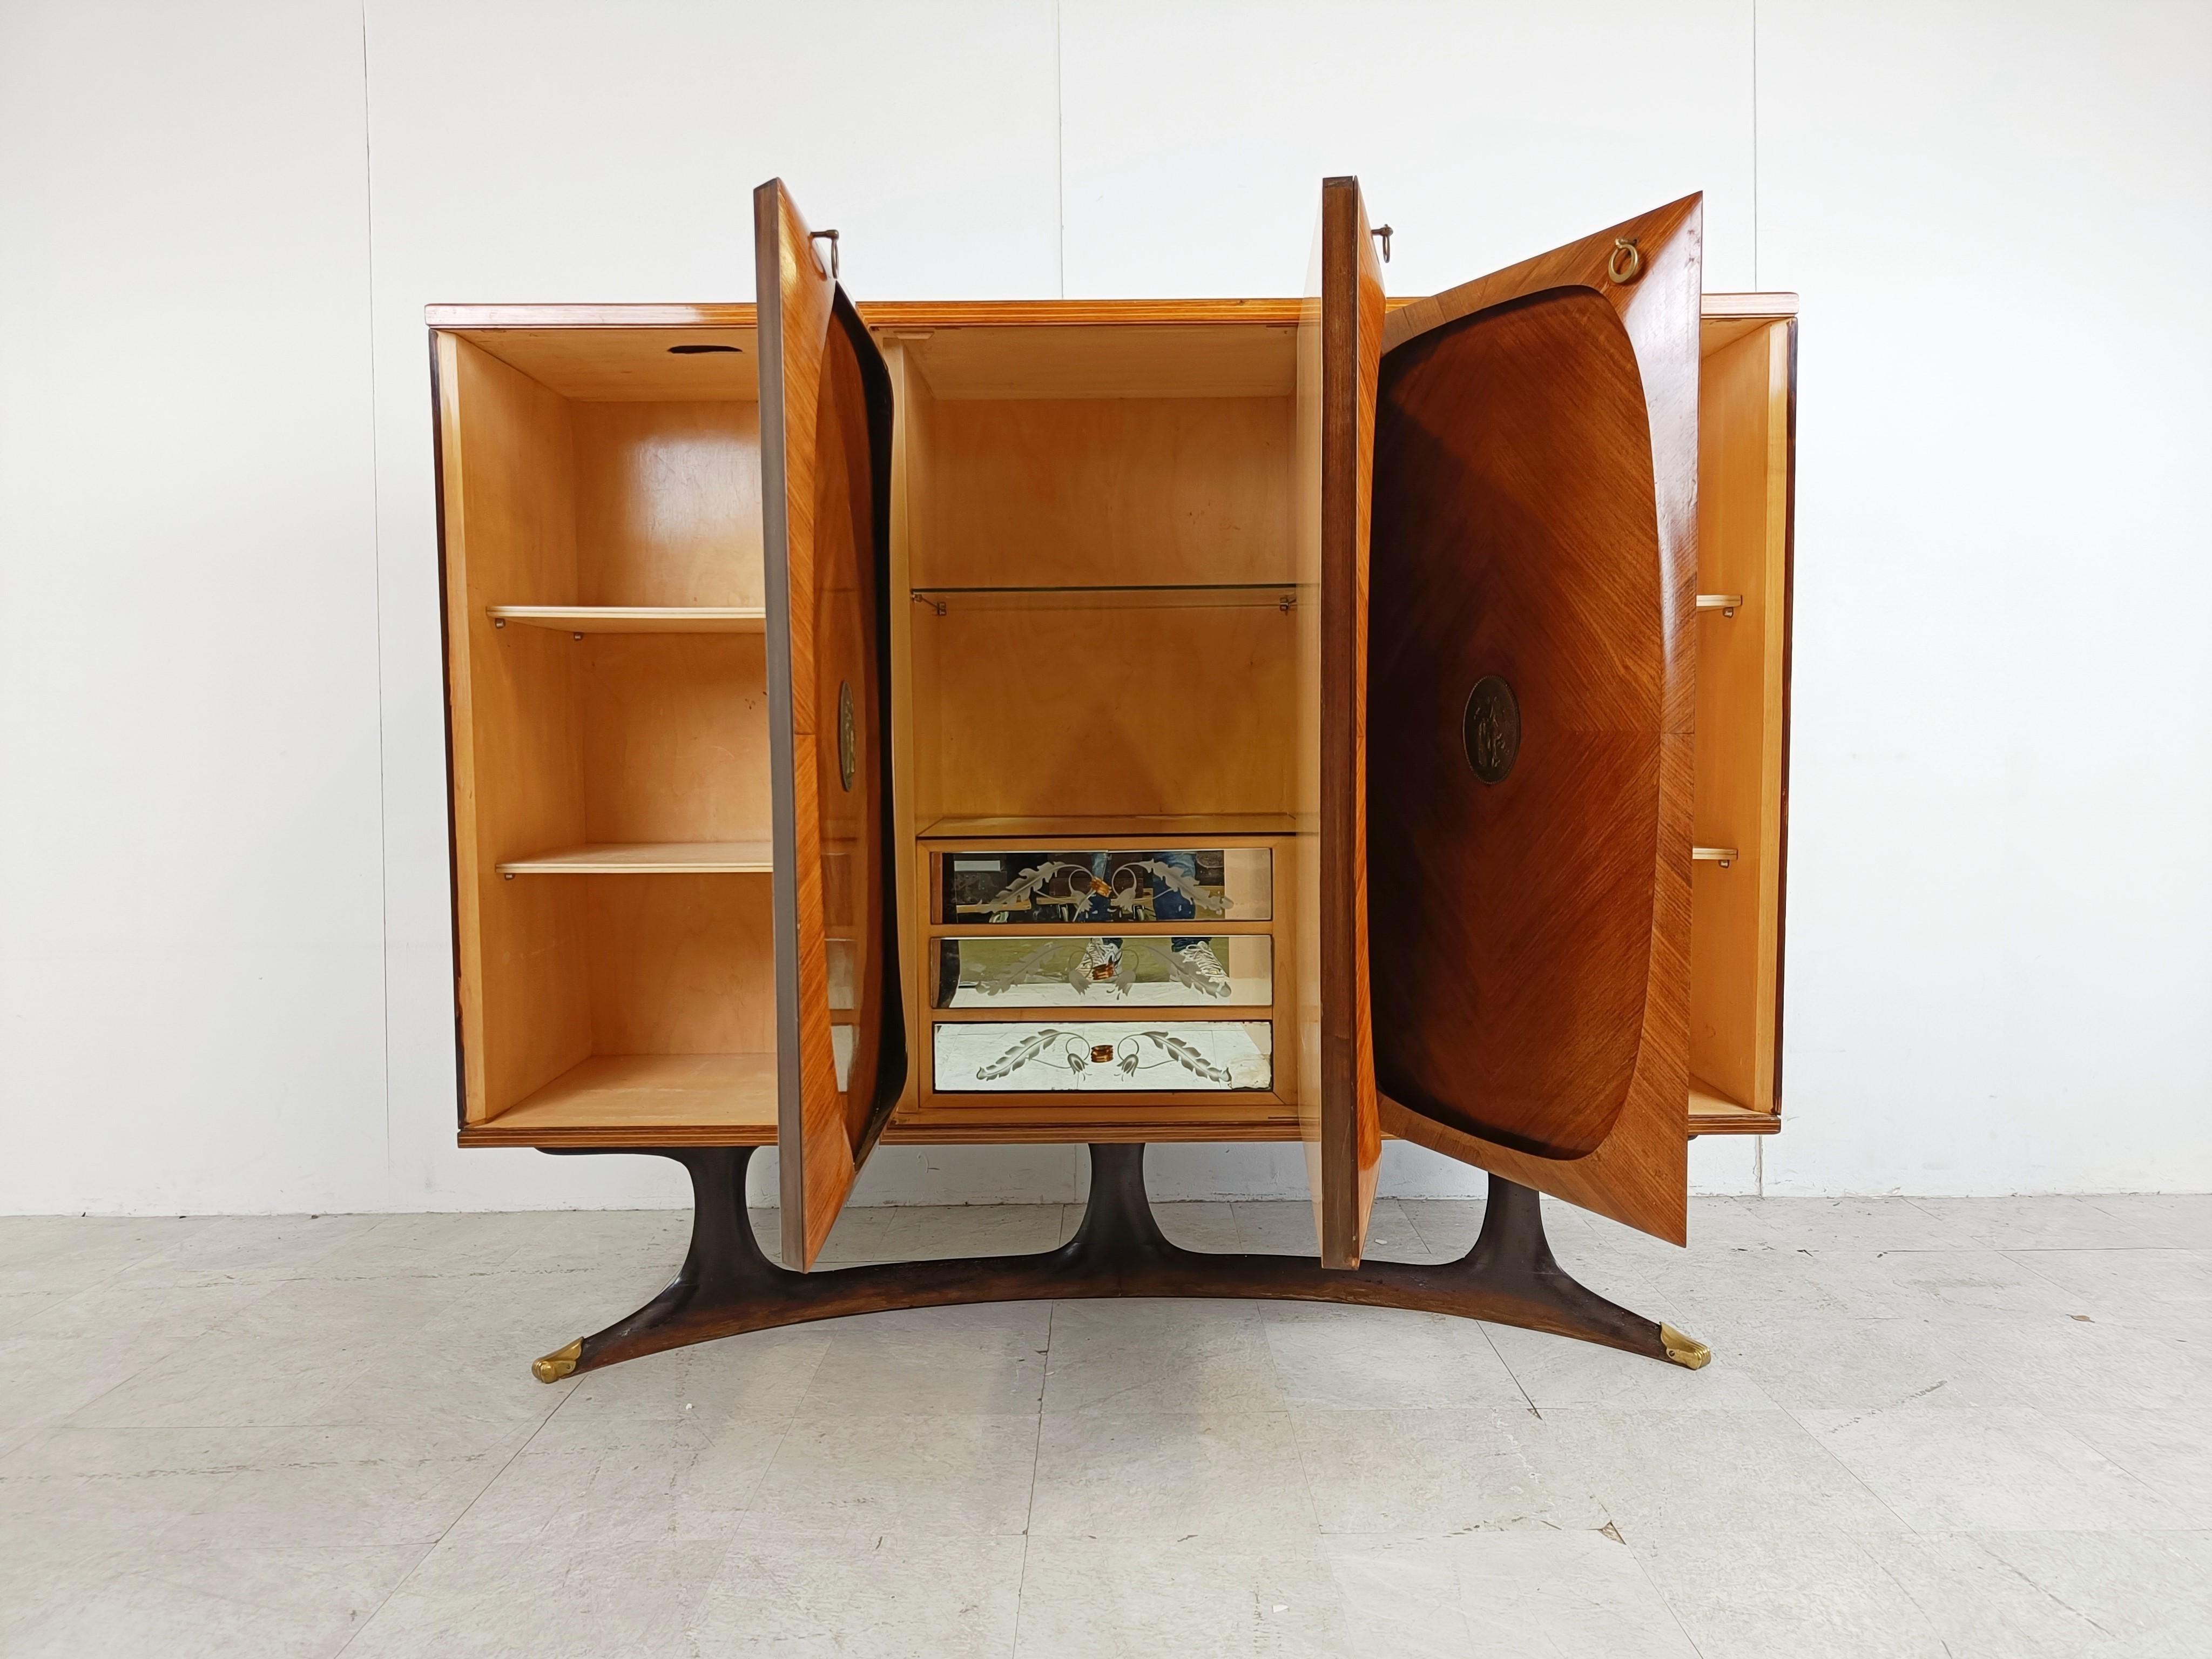 Very elegant mid century highboard designed by Vittorio Dassi for Lissone.

This rosewood highboard consists of three doors each decorated with a brass medaillon. 

The doors are beautifully designed with a finely crafted edge which serves as grip